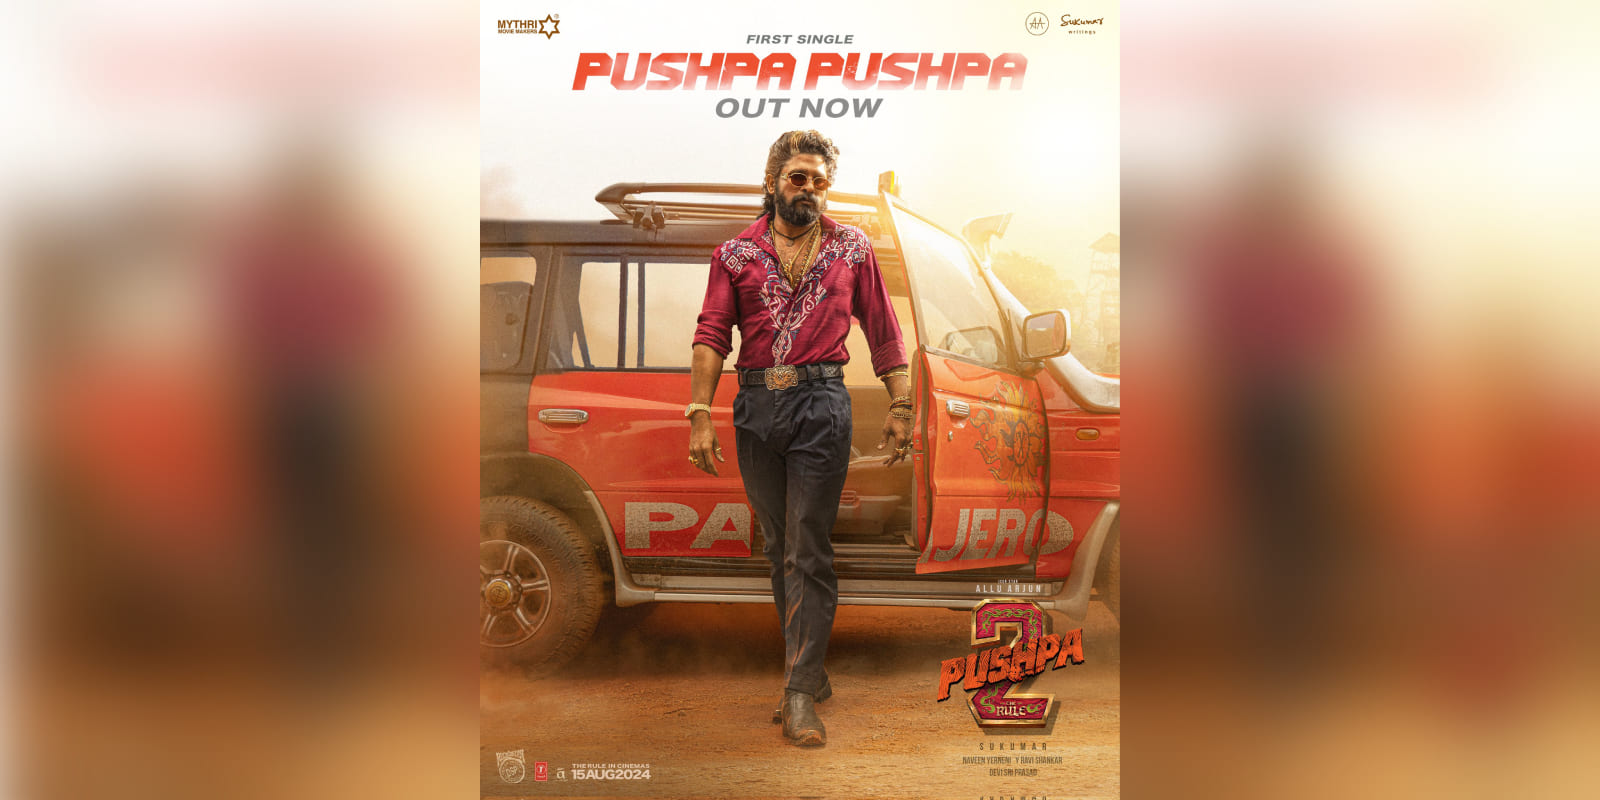 'Pushpa Pushpa' lyrical song from Pushpa 2 released